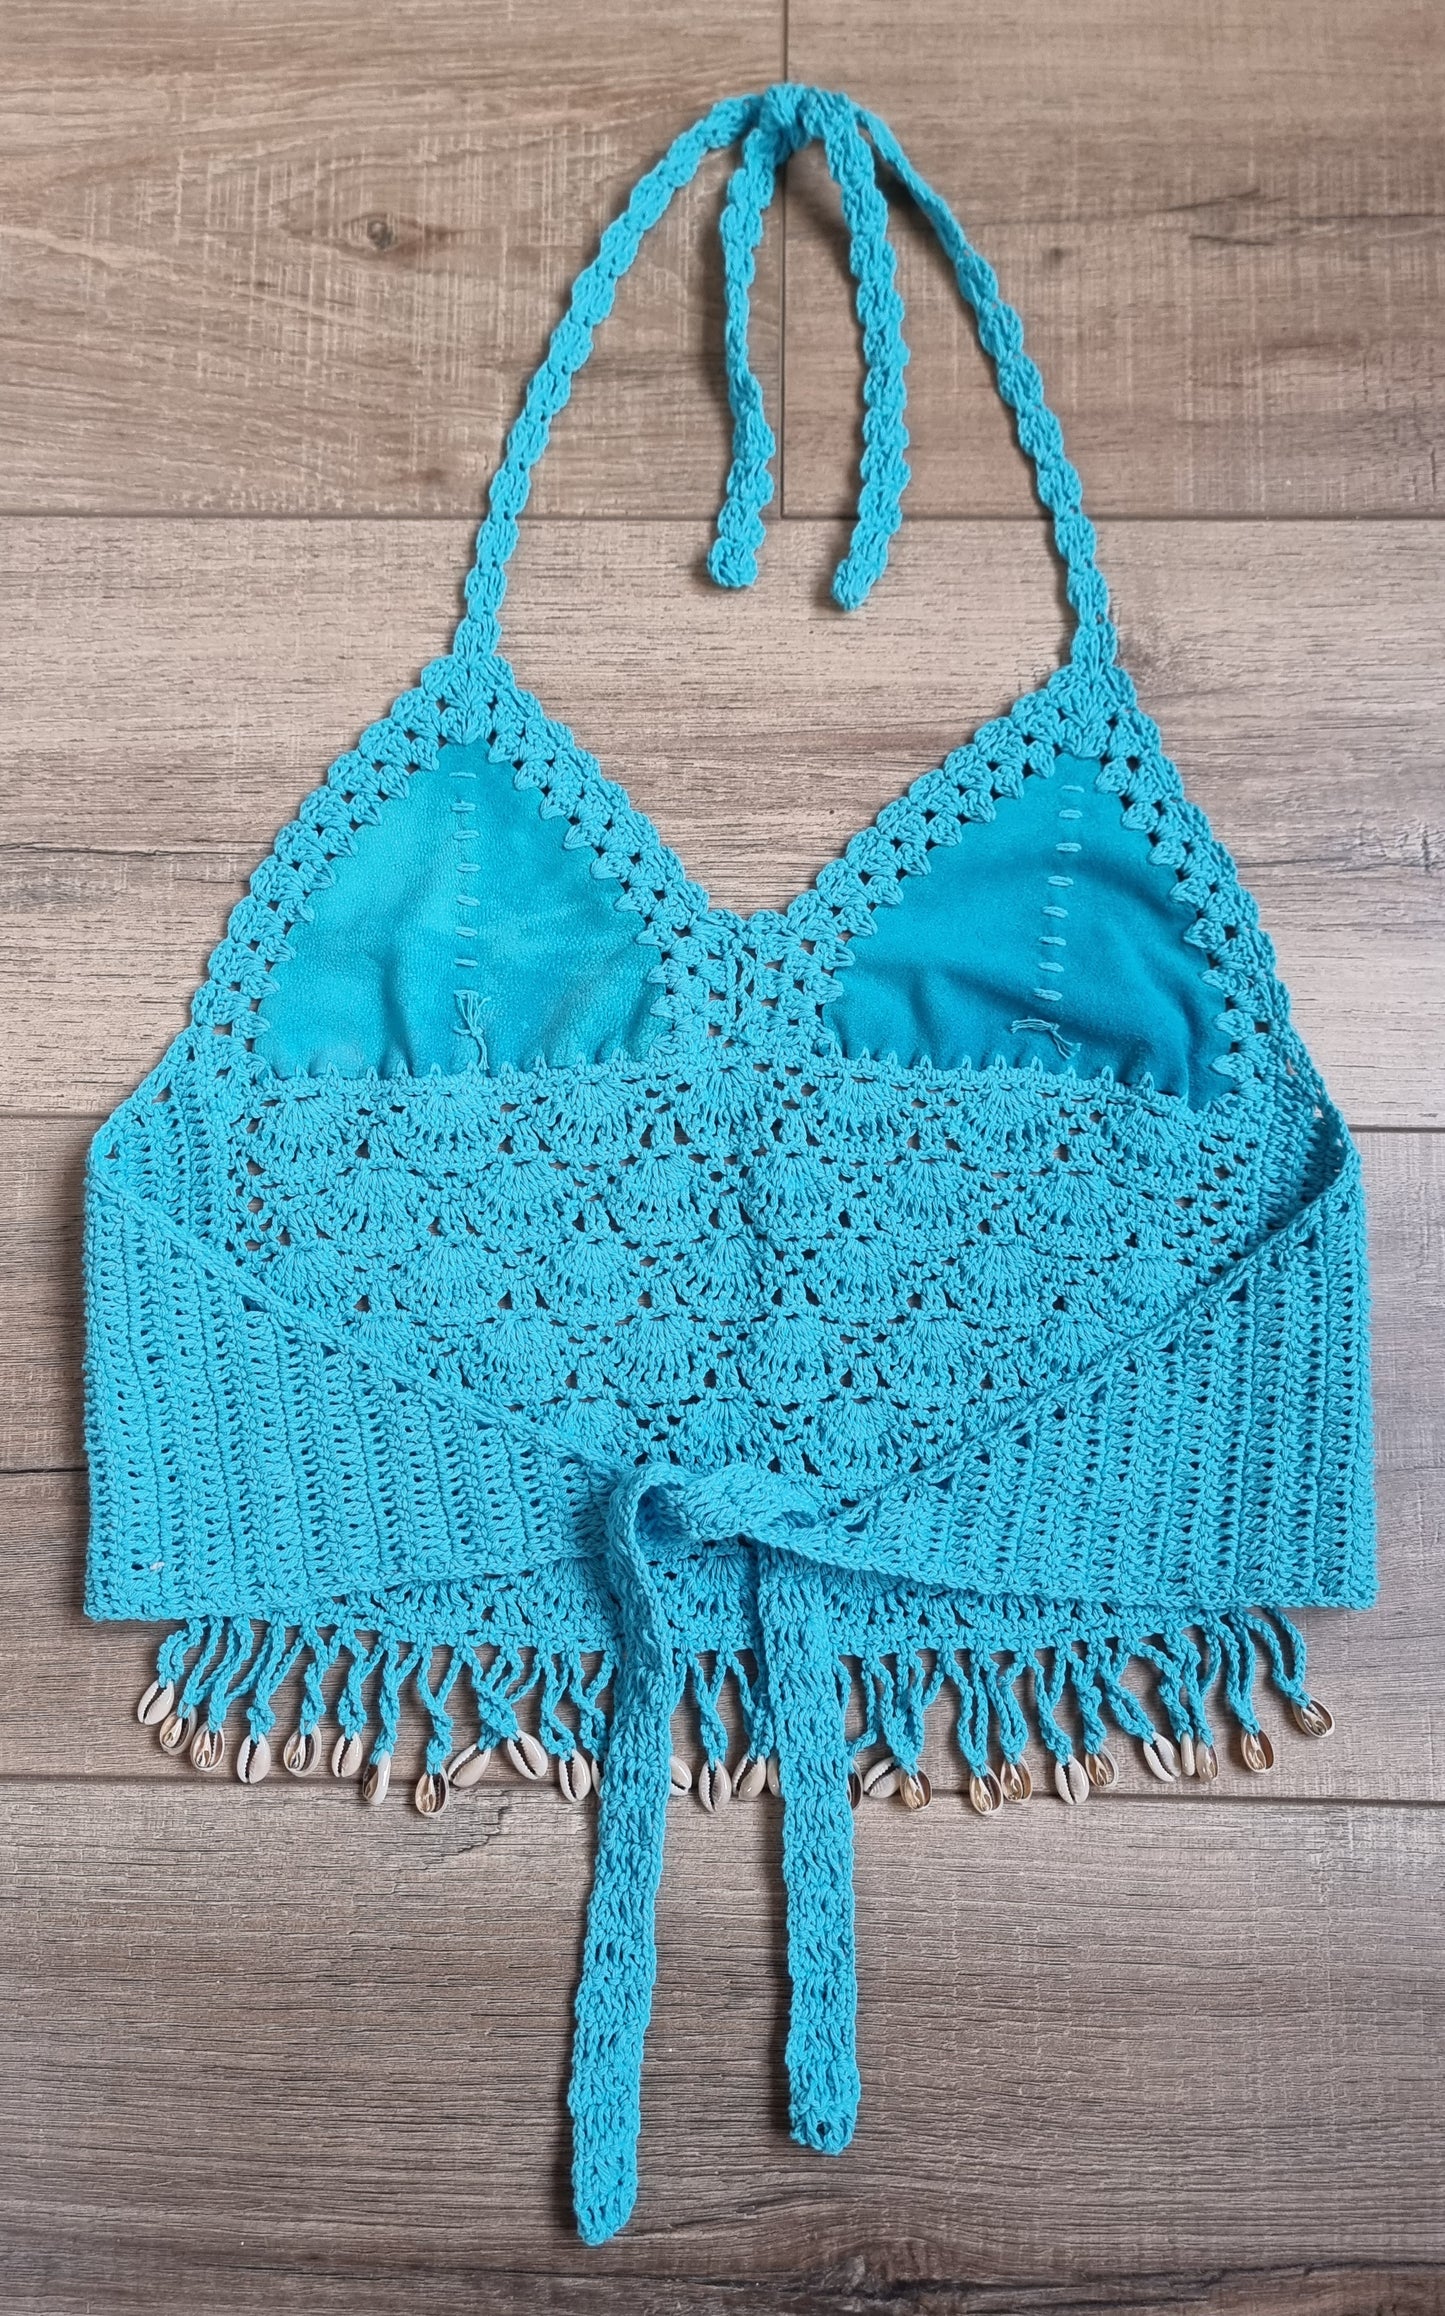 Crochet and Suede Crops